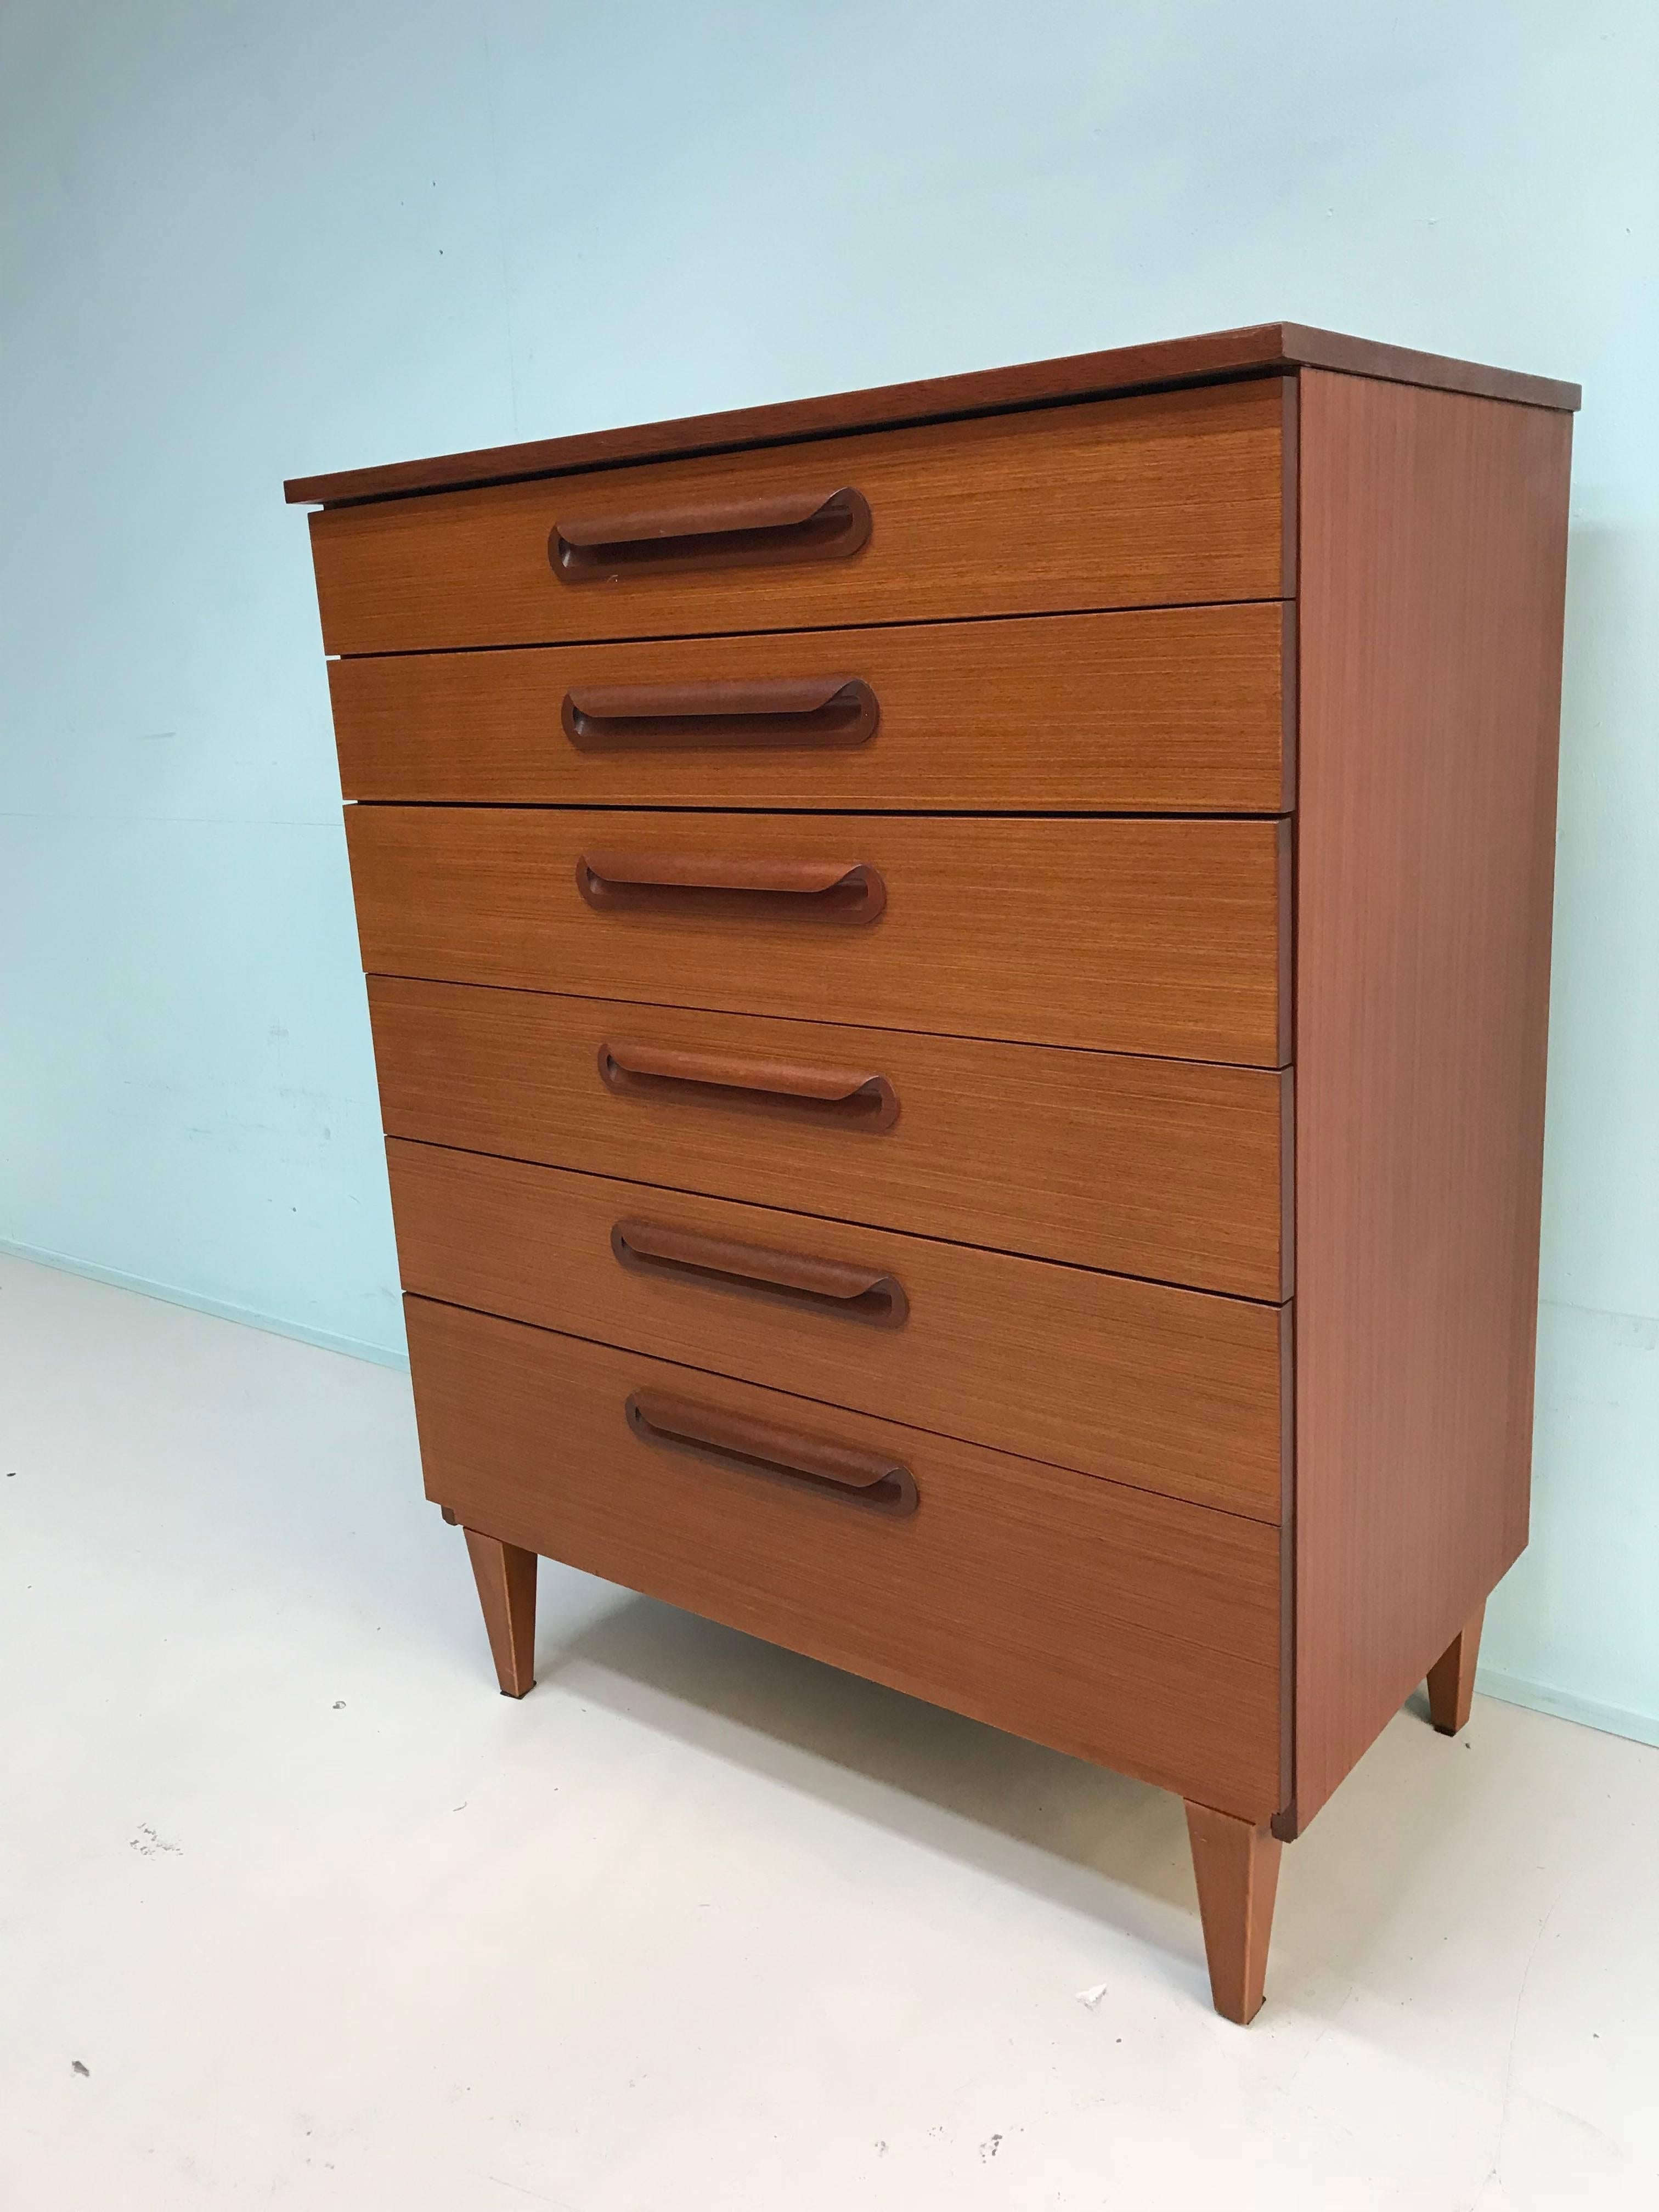 British Midcentury Teak Chest of Drawers For Sale